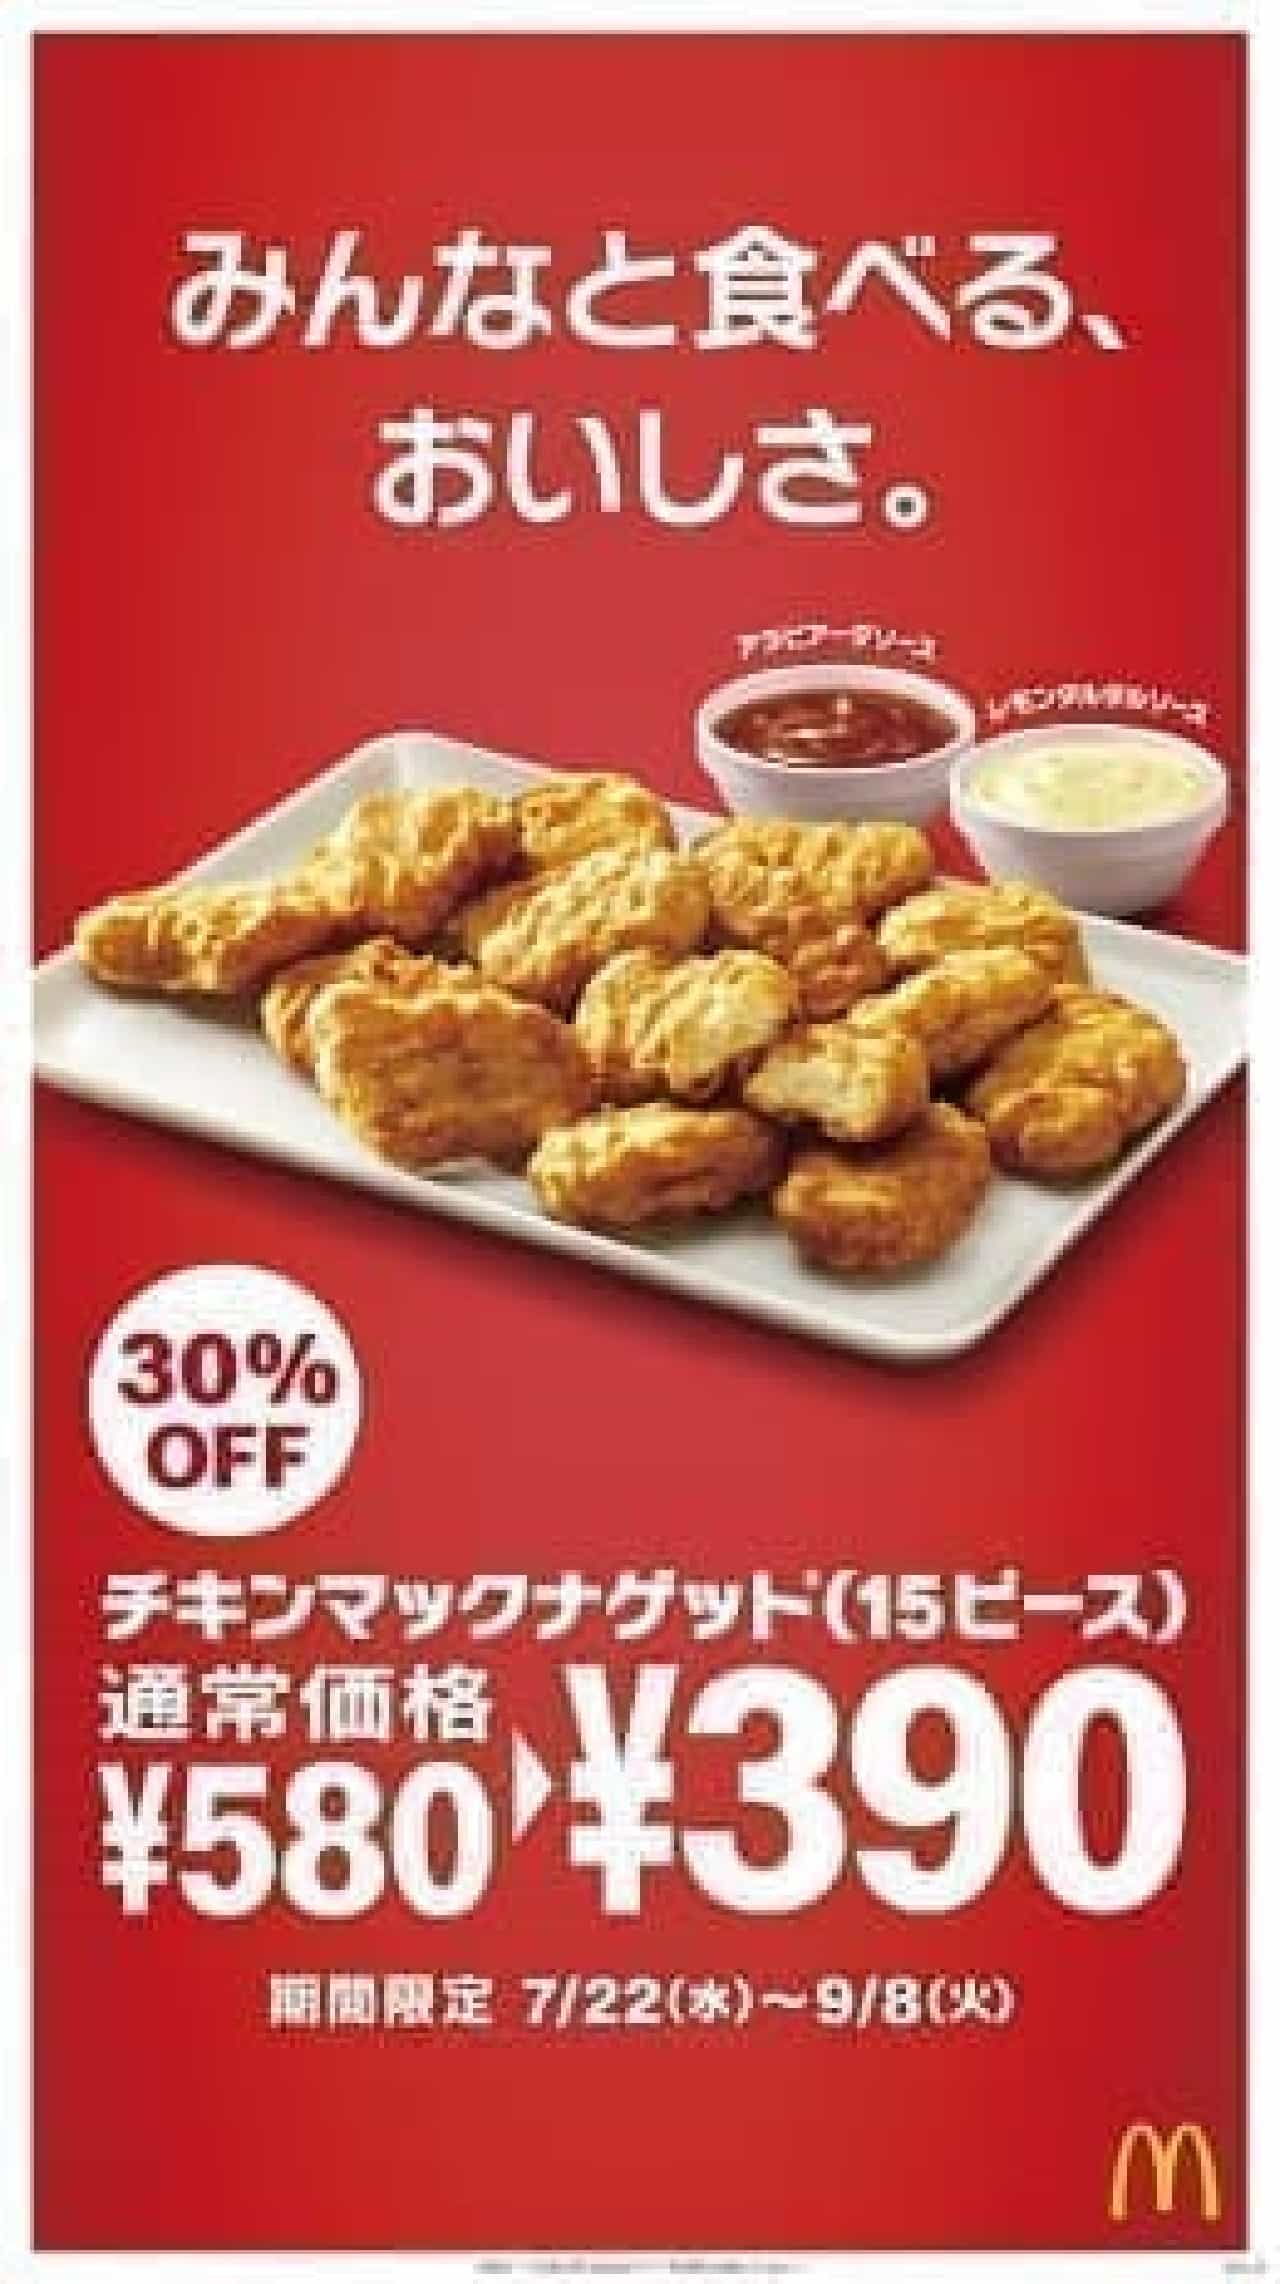 30% off "Chicken Mac Nugget 15 Pieces" for a limited time